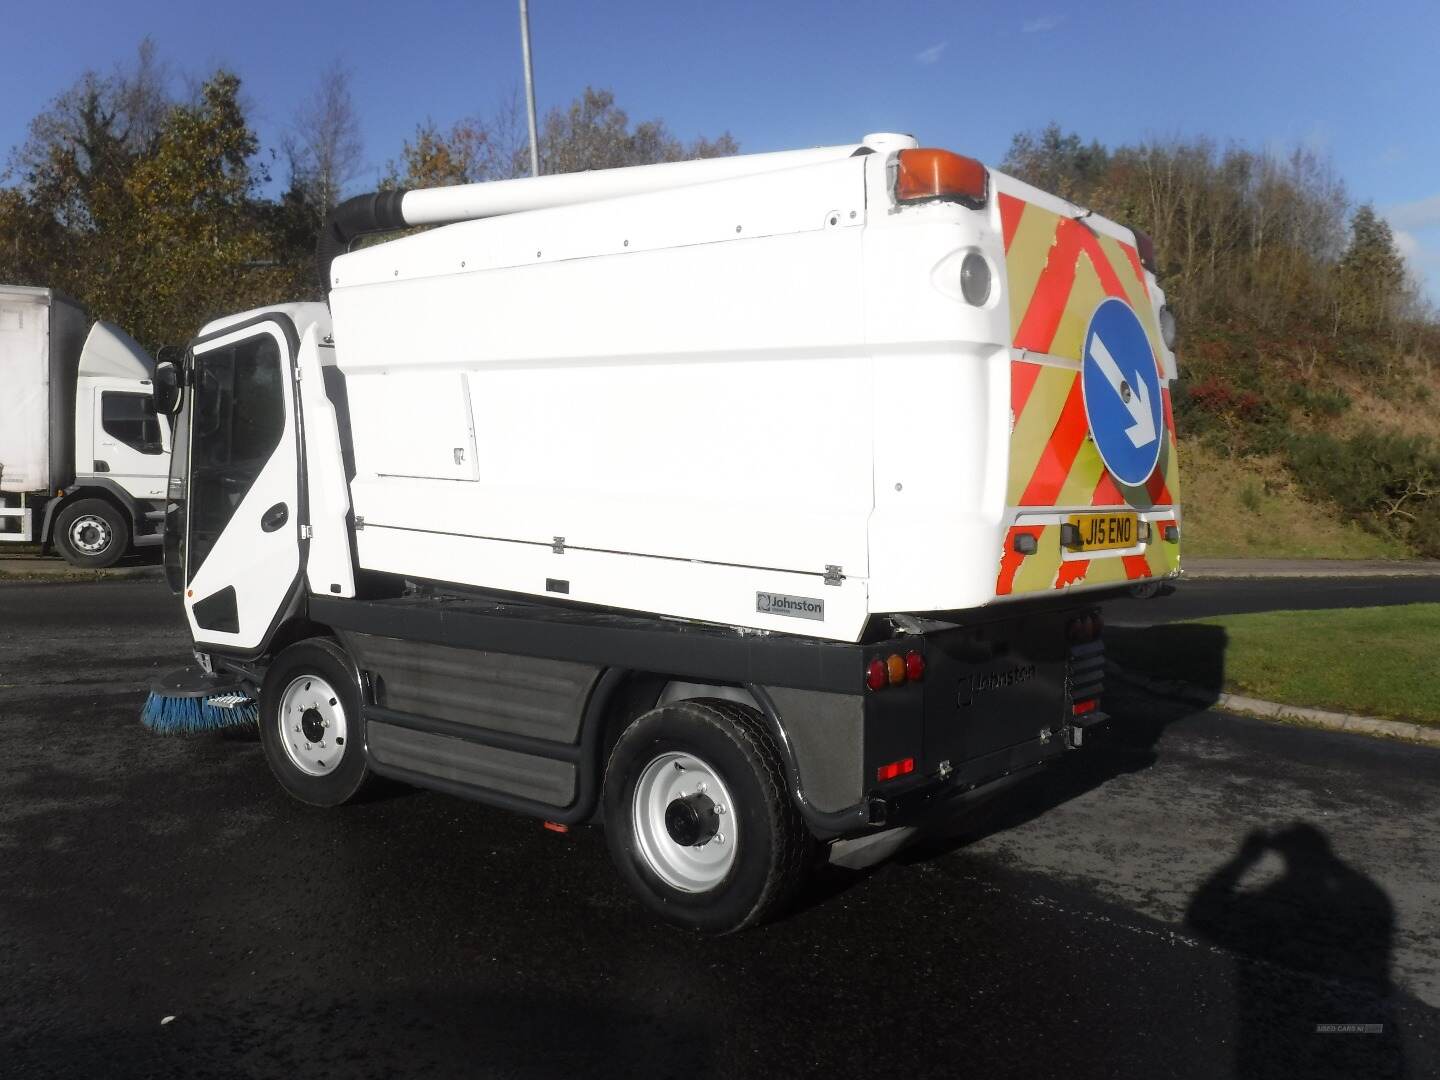 Johnstons CR400 Road Sweeper - power washer - gully sucker . in Down